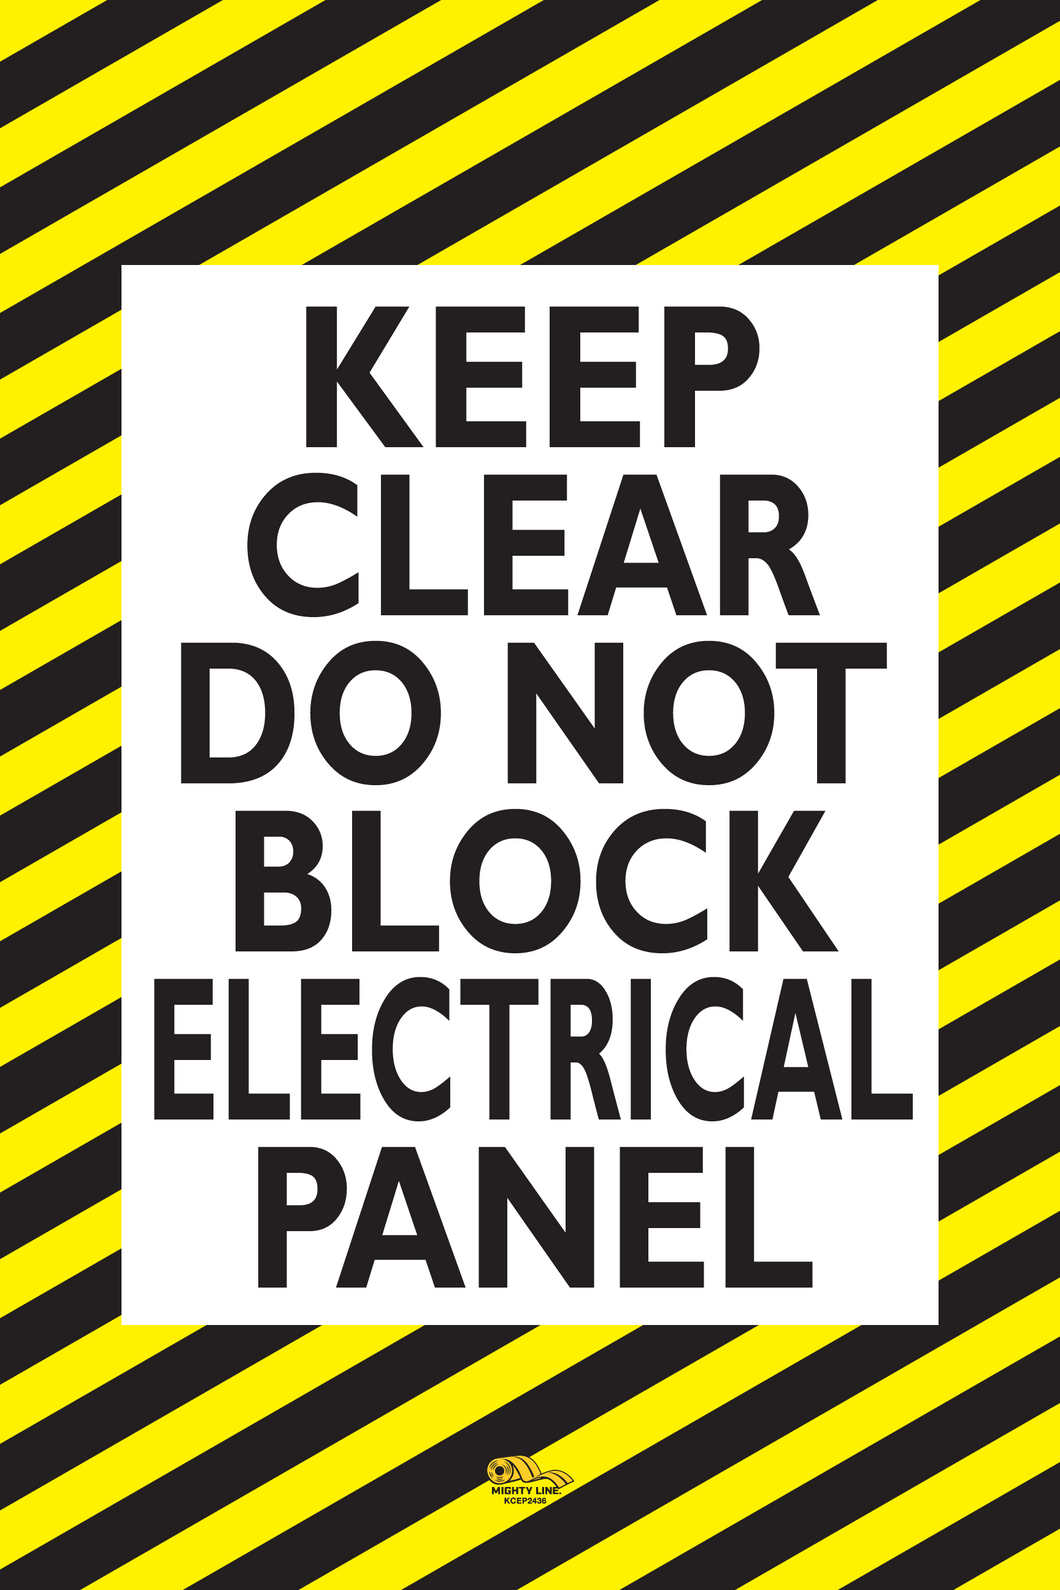 Keep Clear Do Not Block Electrical Panel, Mighty Line Floor Sign, Industrial Strength, 24x36